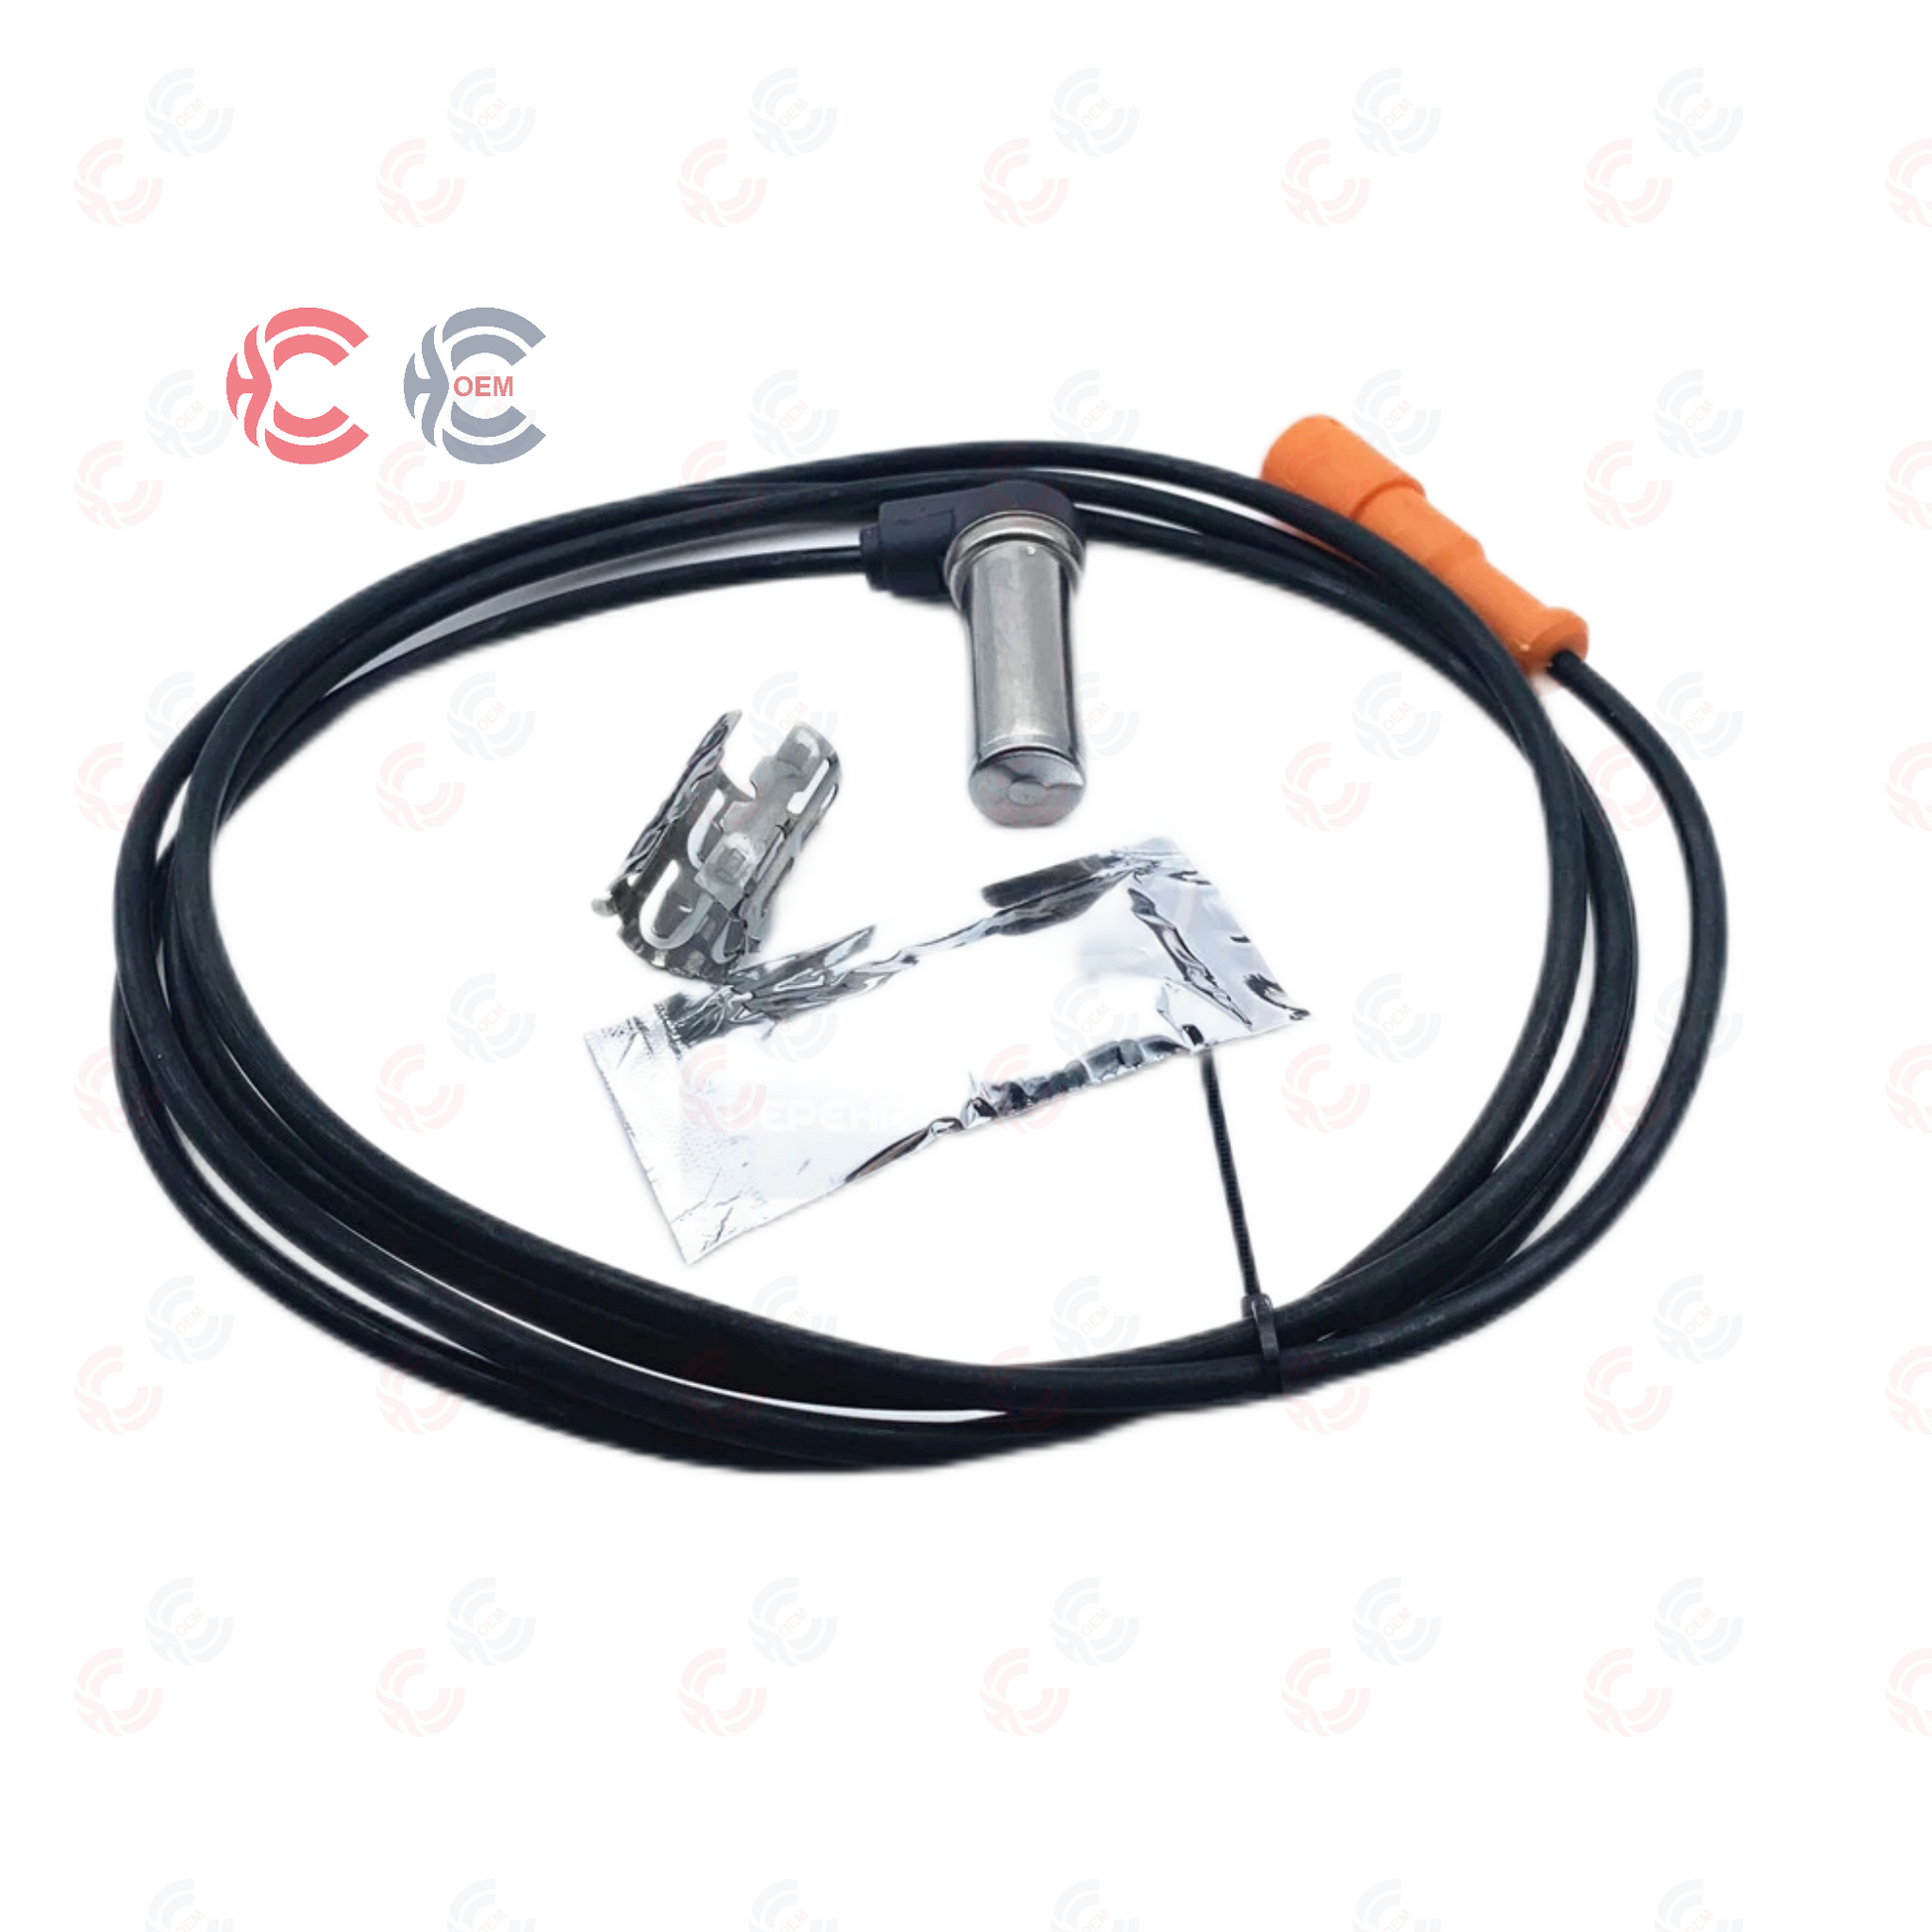 OEM: 1517455 2000mmMaterial: ABS MetalColor: Black SilverOrigin: Made in ChinaWeight: 100gPacking List: 1* Wheel Speed Sensor More ServiceWe can provide OEM Manufacturing serviceWe can Be your one-step solution for Auto PartsWe can provide technical scheme for you Feel Free to Contact Us, We will get back to you as soon as possible.